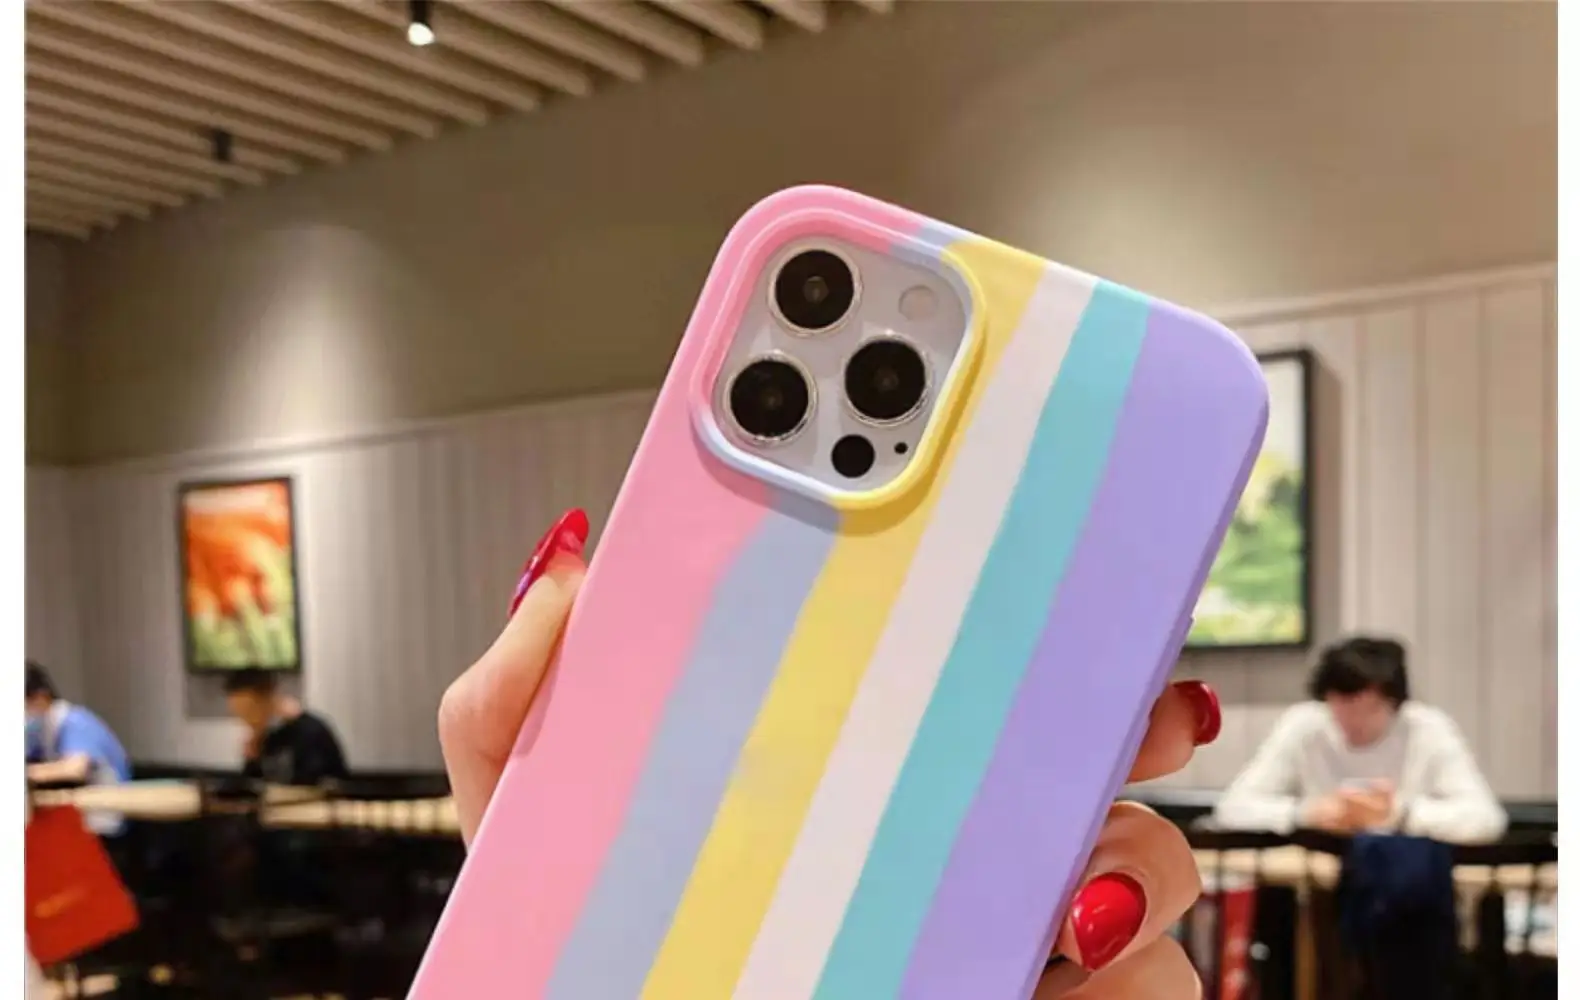 

phone case iphone xr silicone rainbow pattern modello arcobaleno per custodia in silicone per iphone xr iphone xr